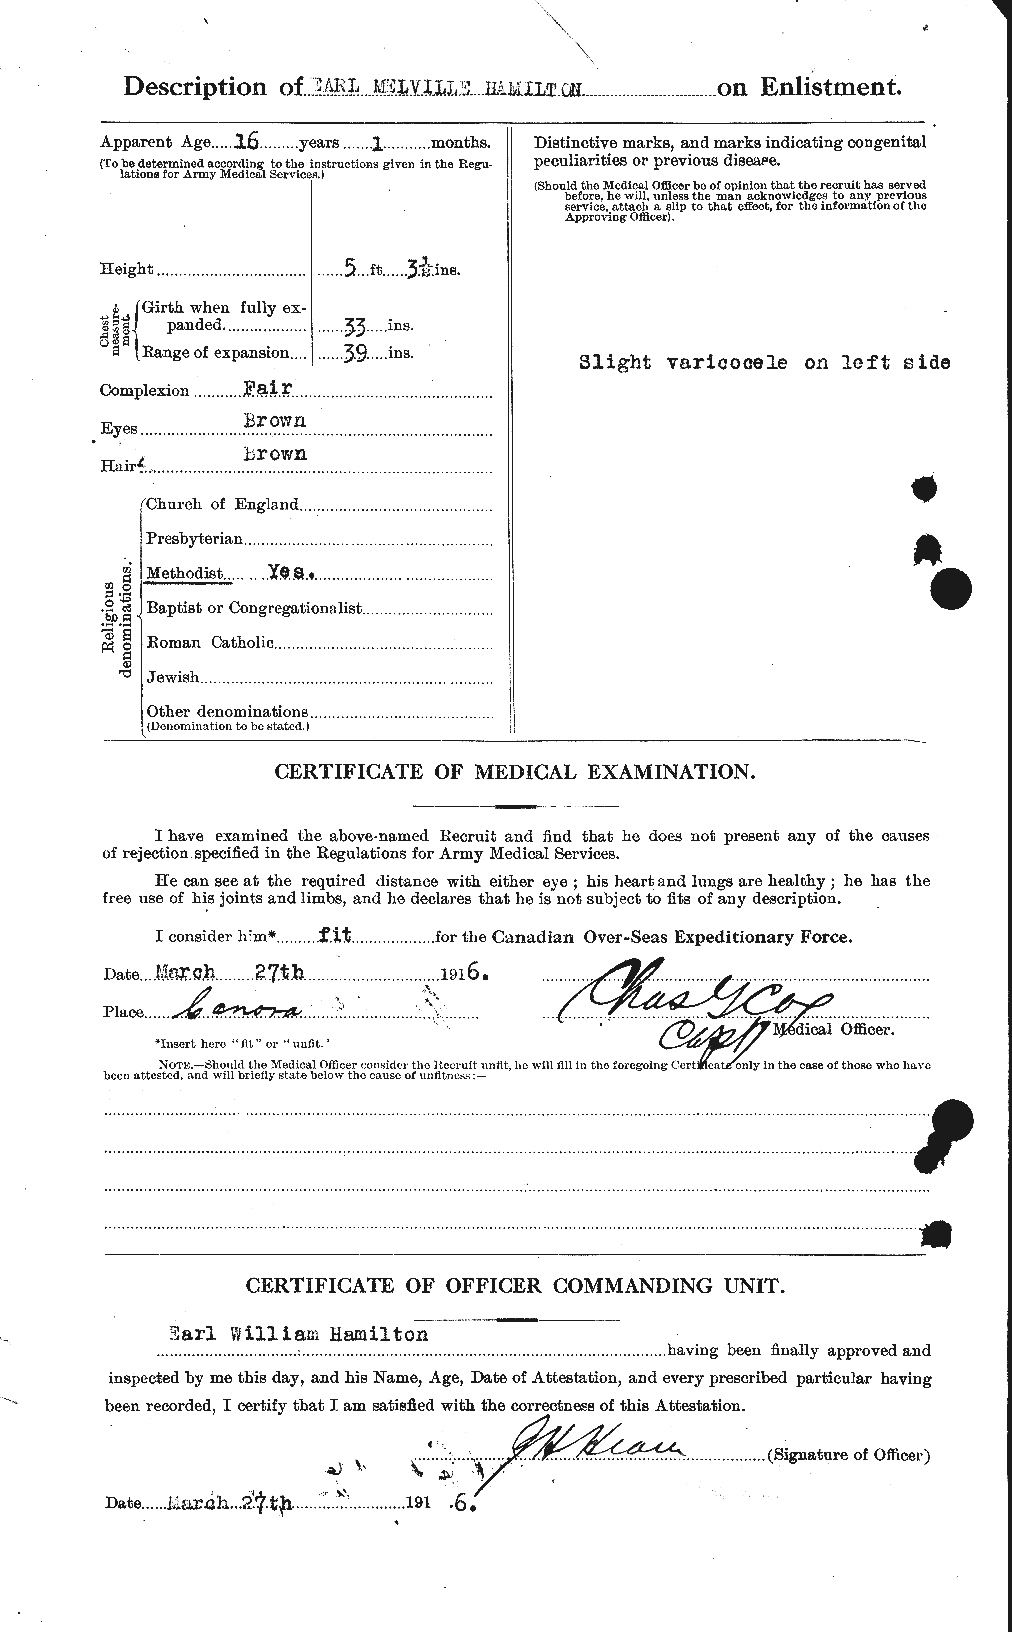 Personnel Records of the First World War - CEF 375369b